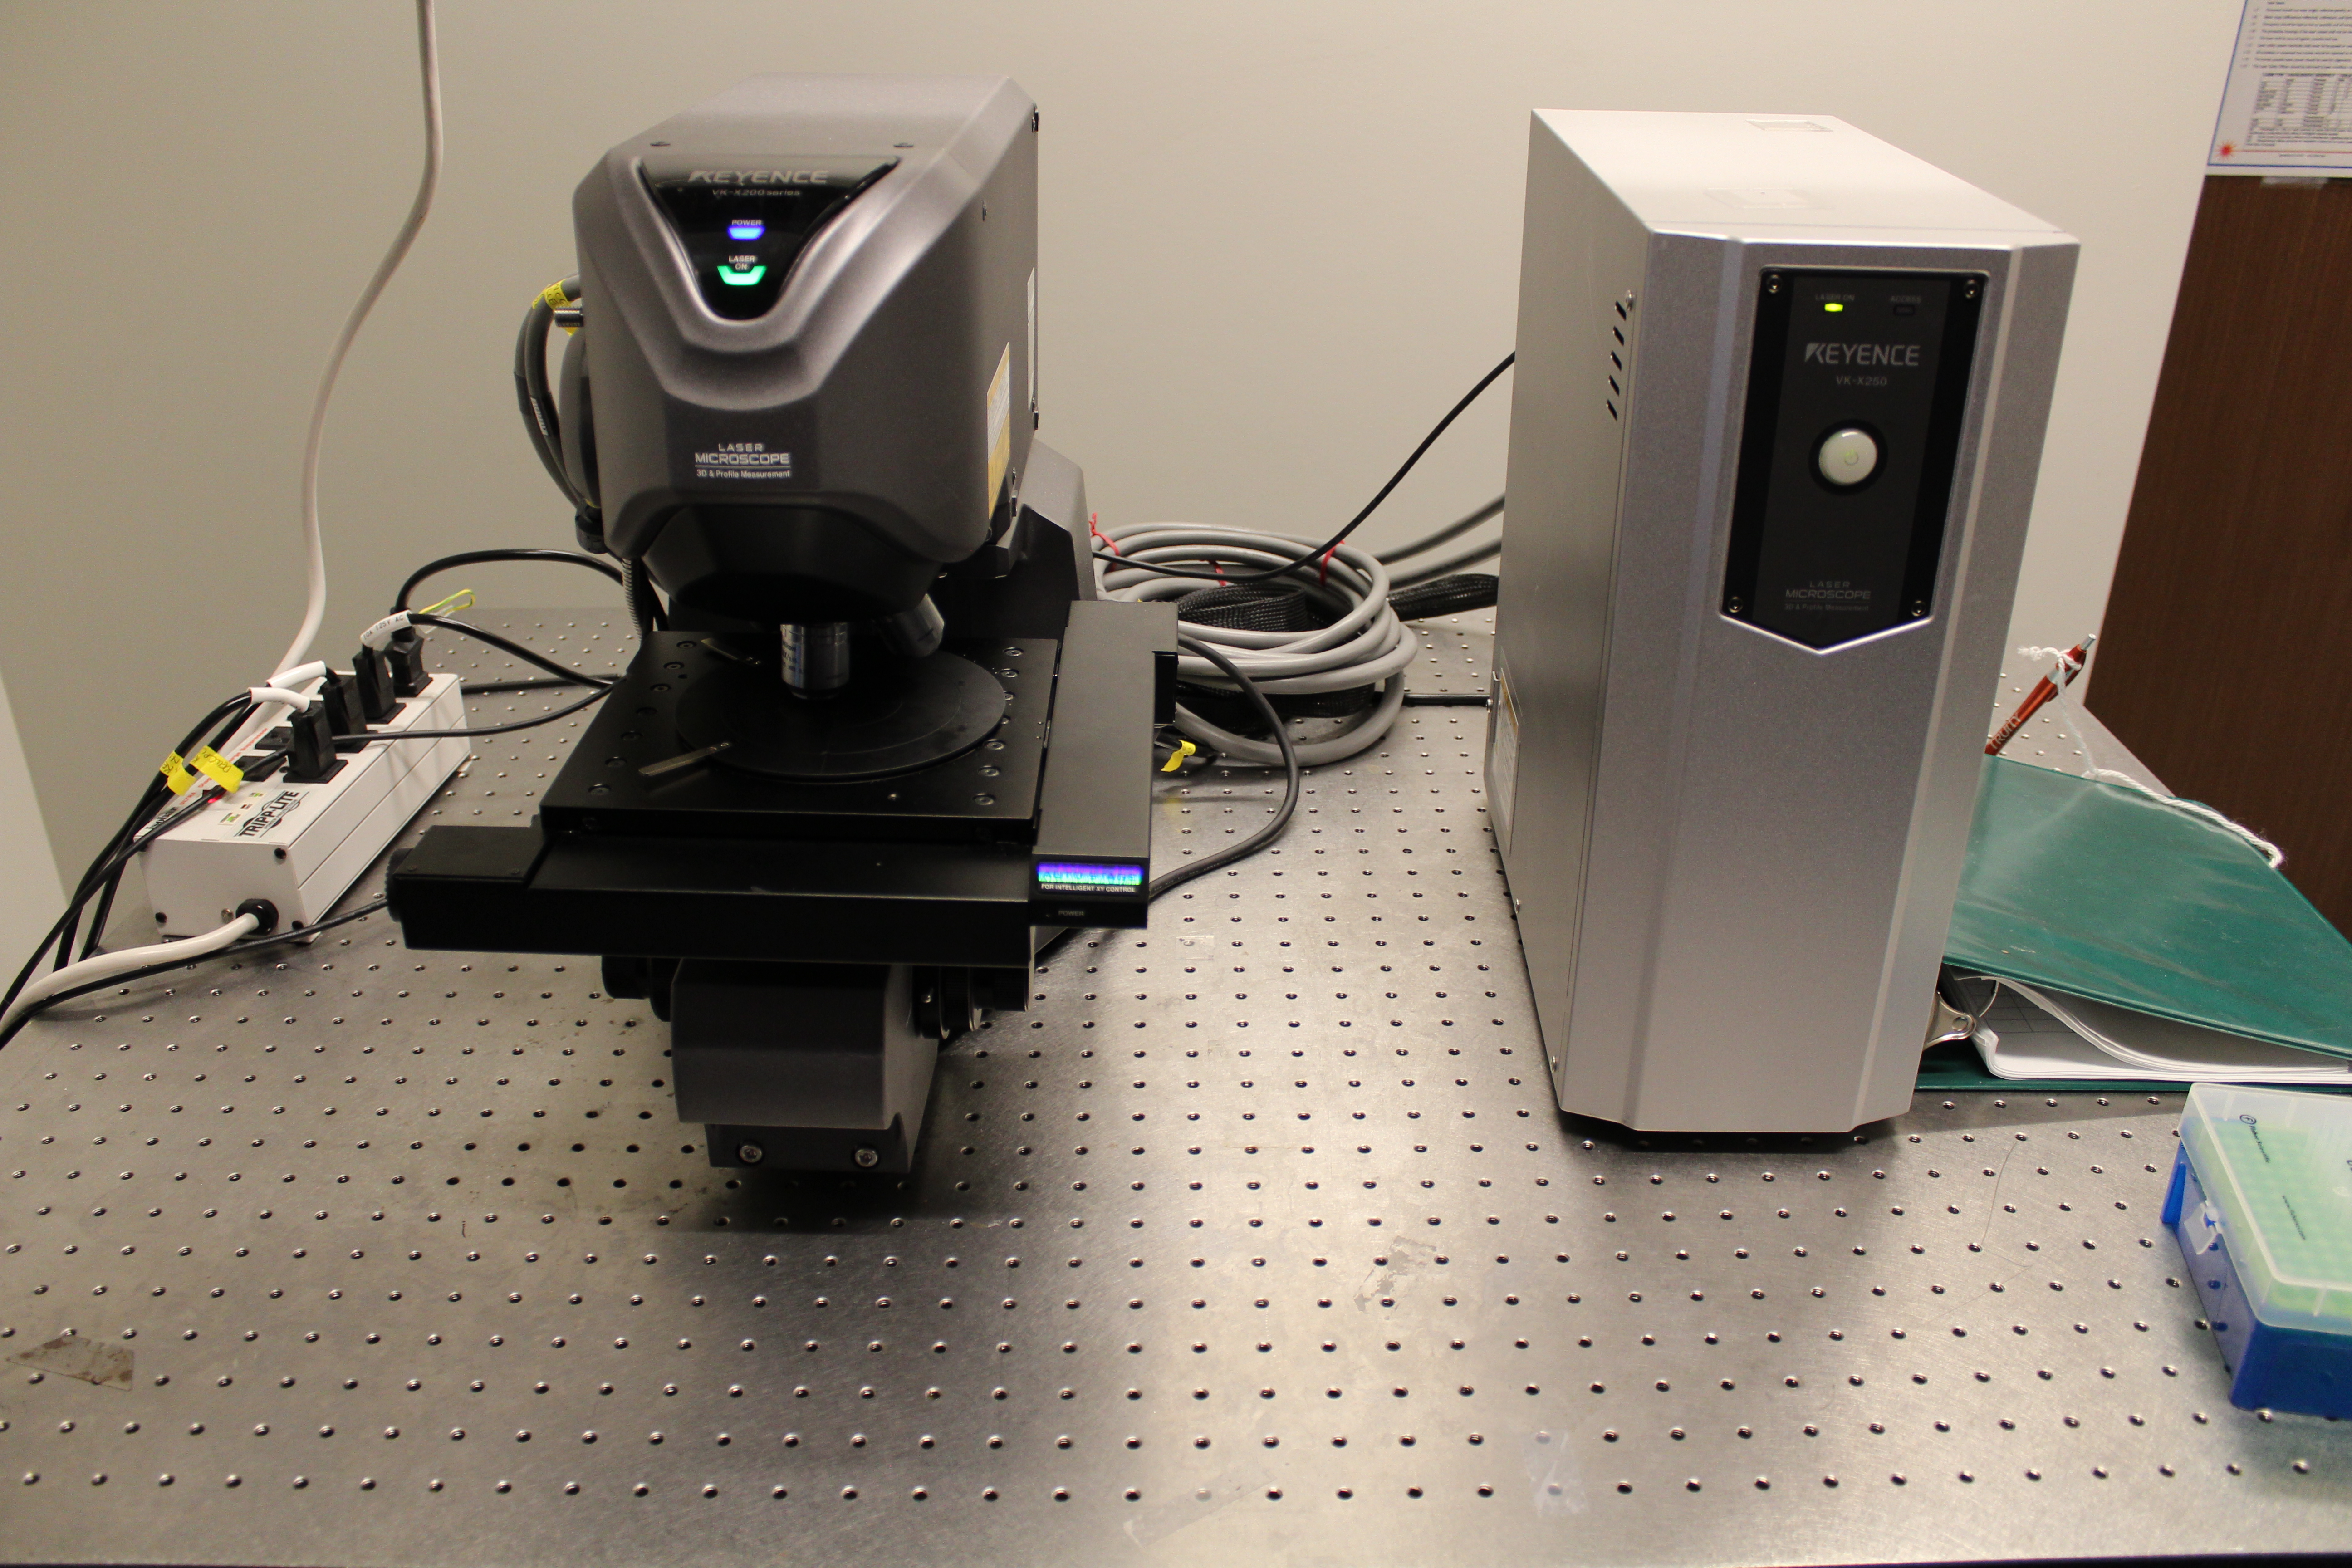 Laboratory setup with a precision microscope and electronic unit on a metal table, with cables and a face mask nearby.